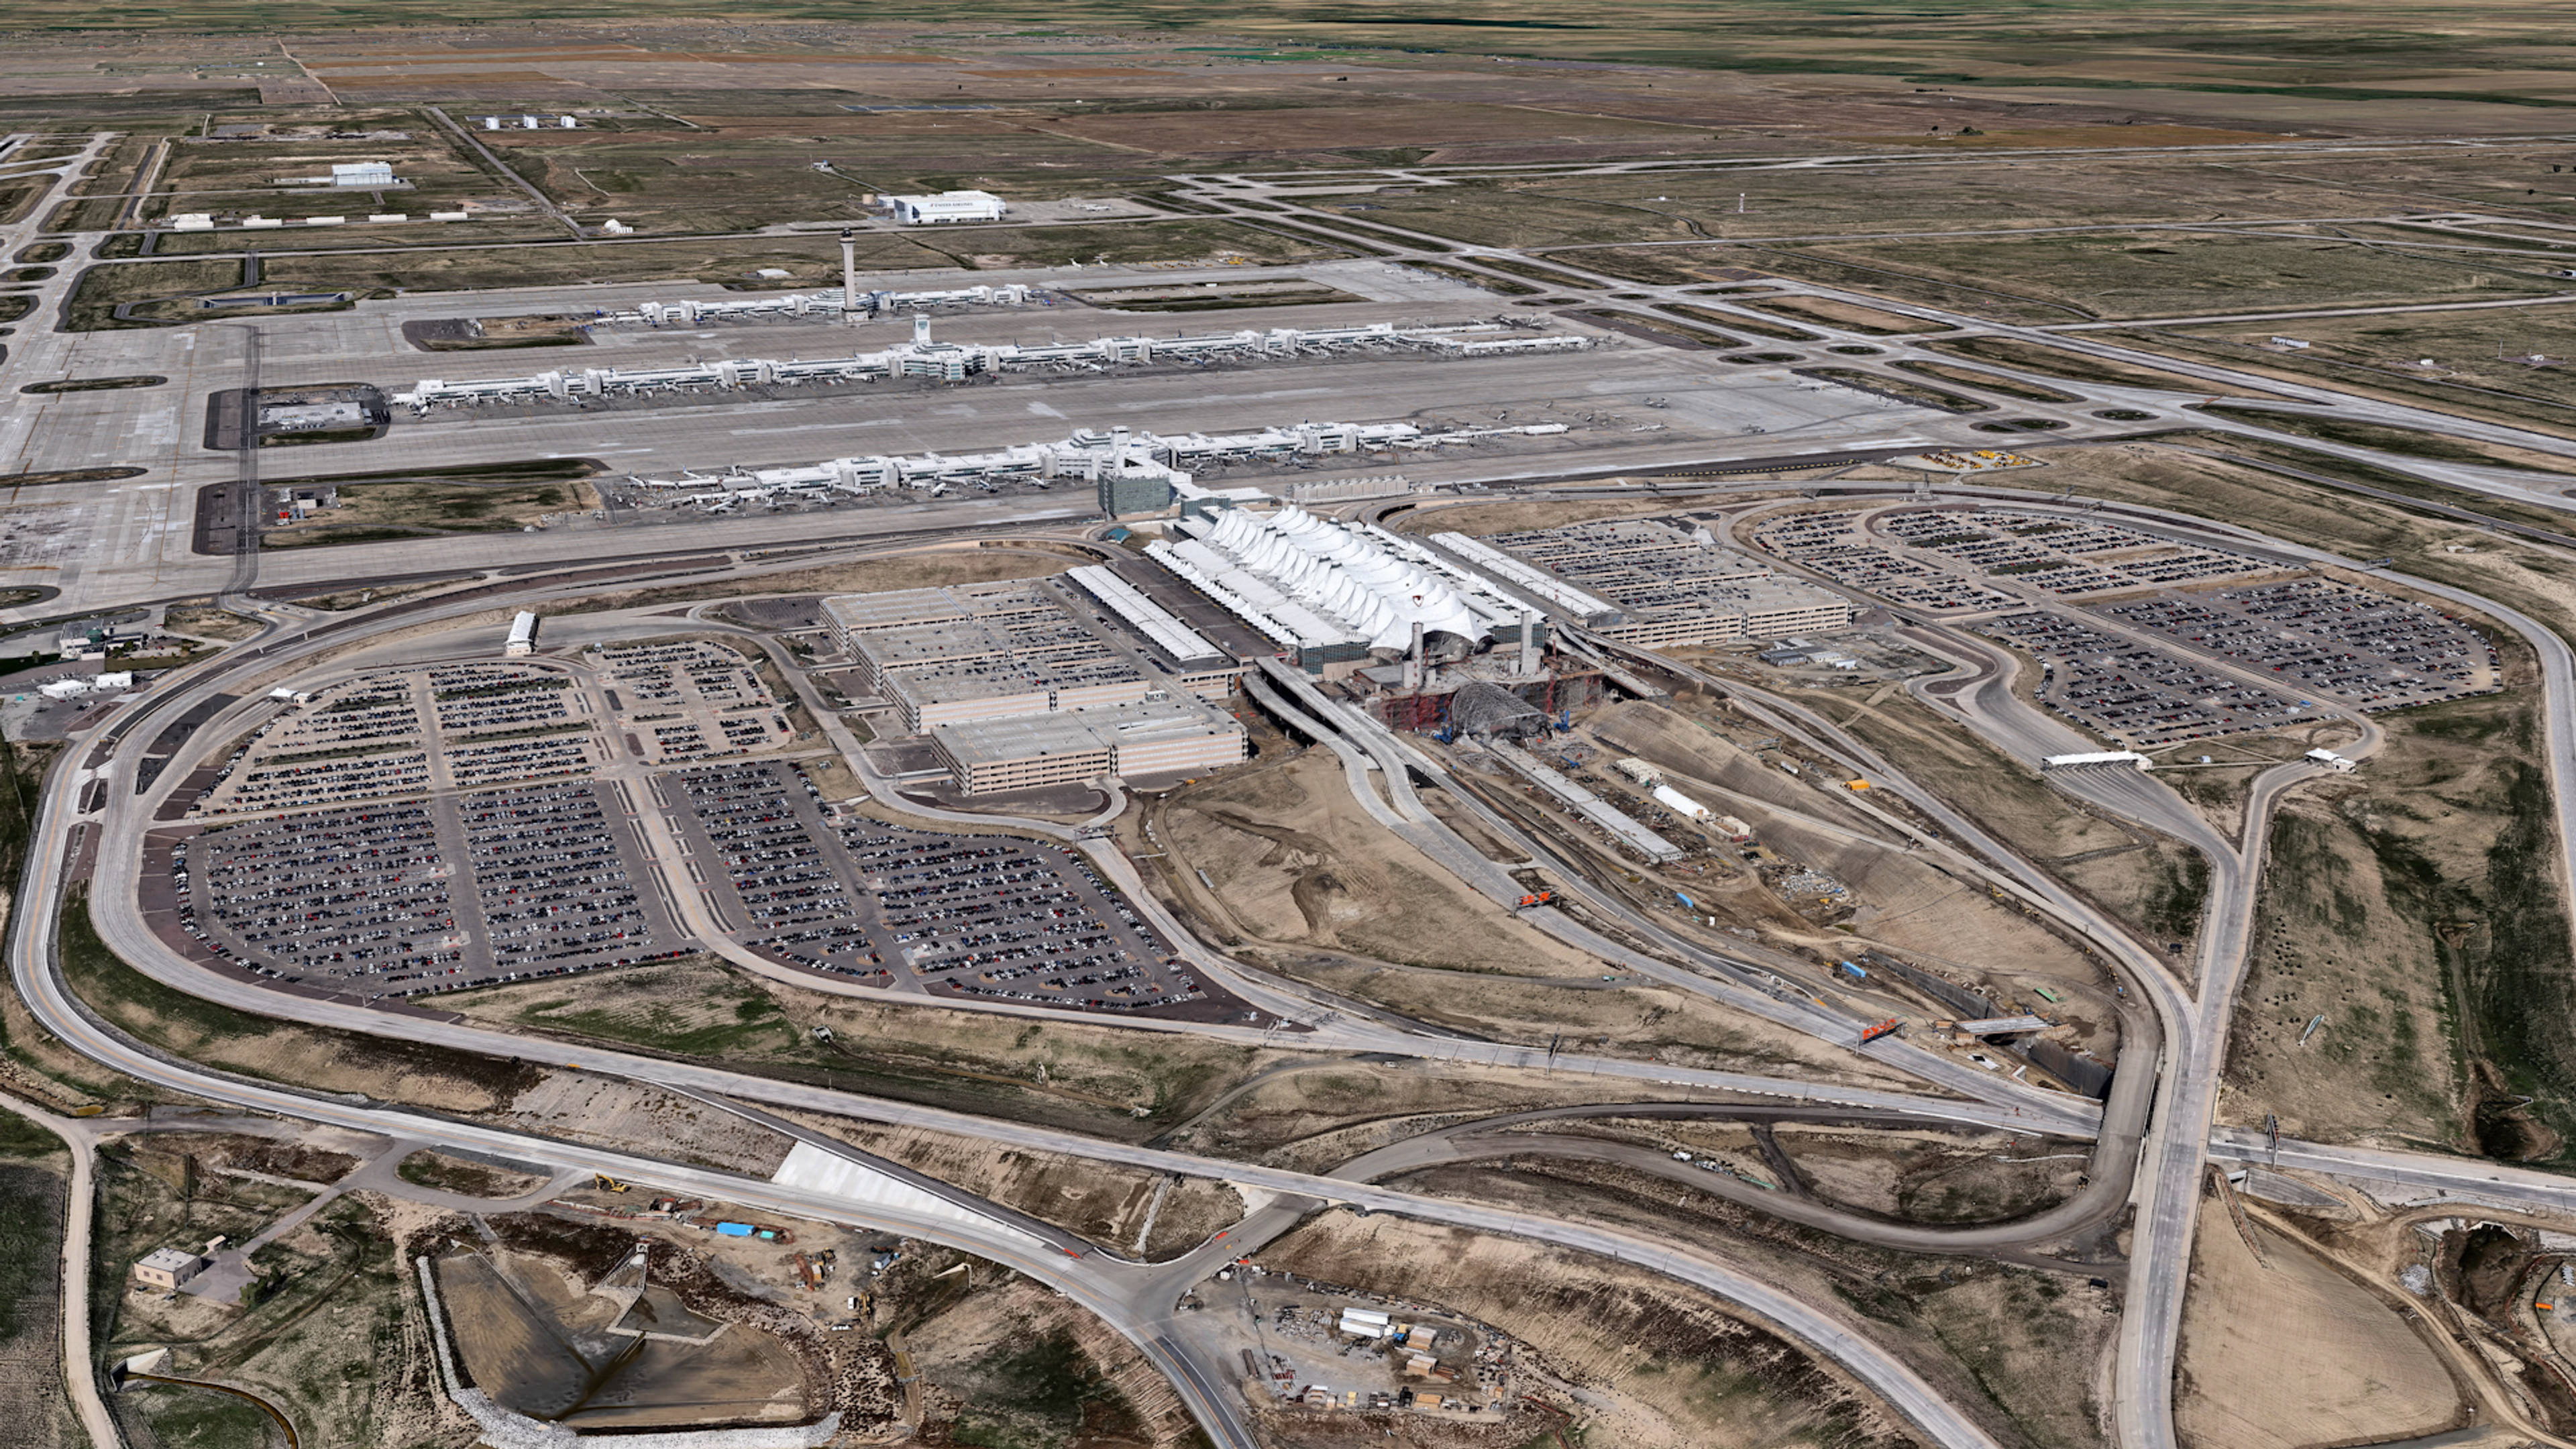  Aerial View of Denver Airport Parking